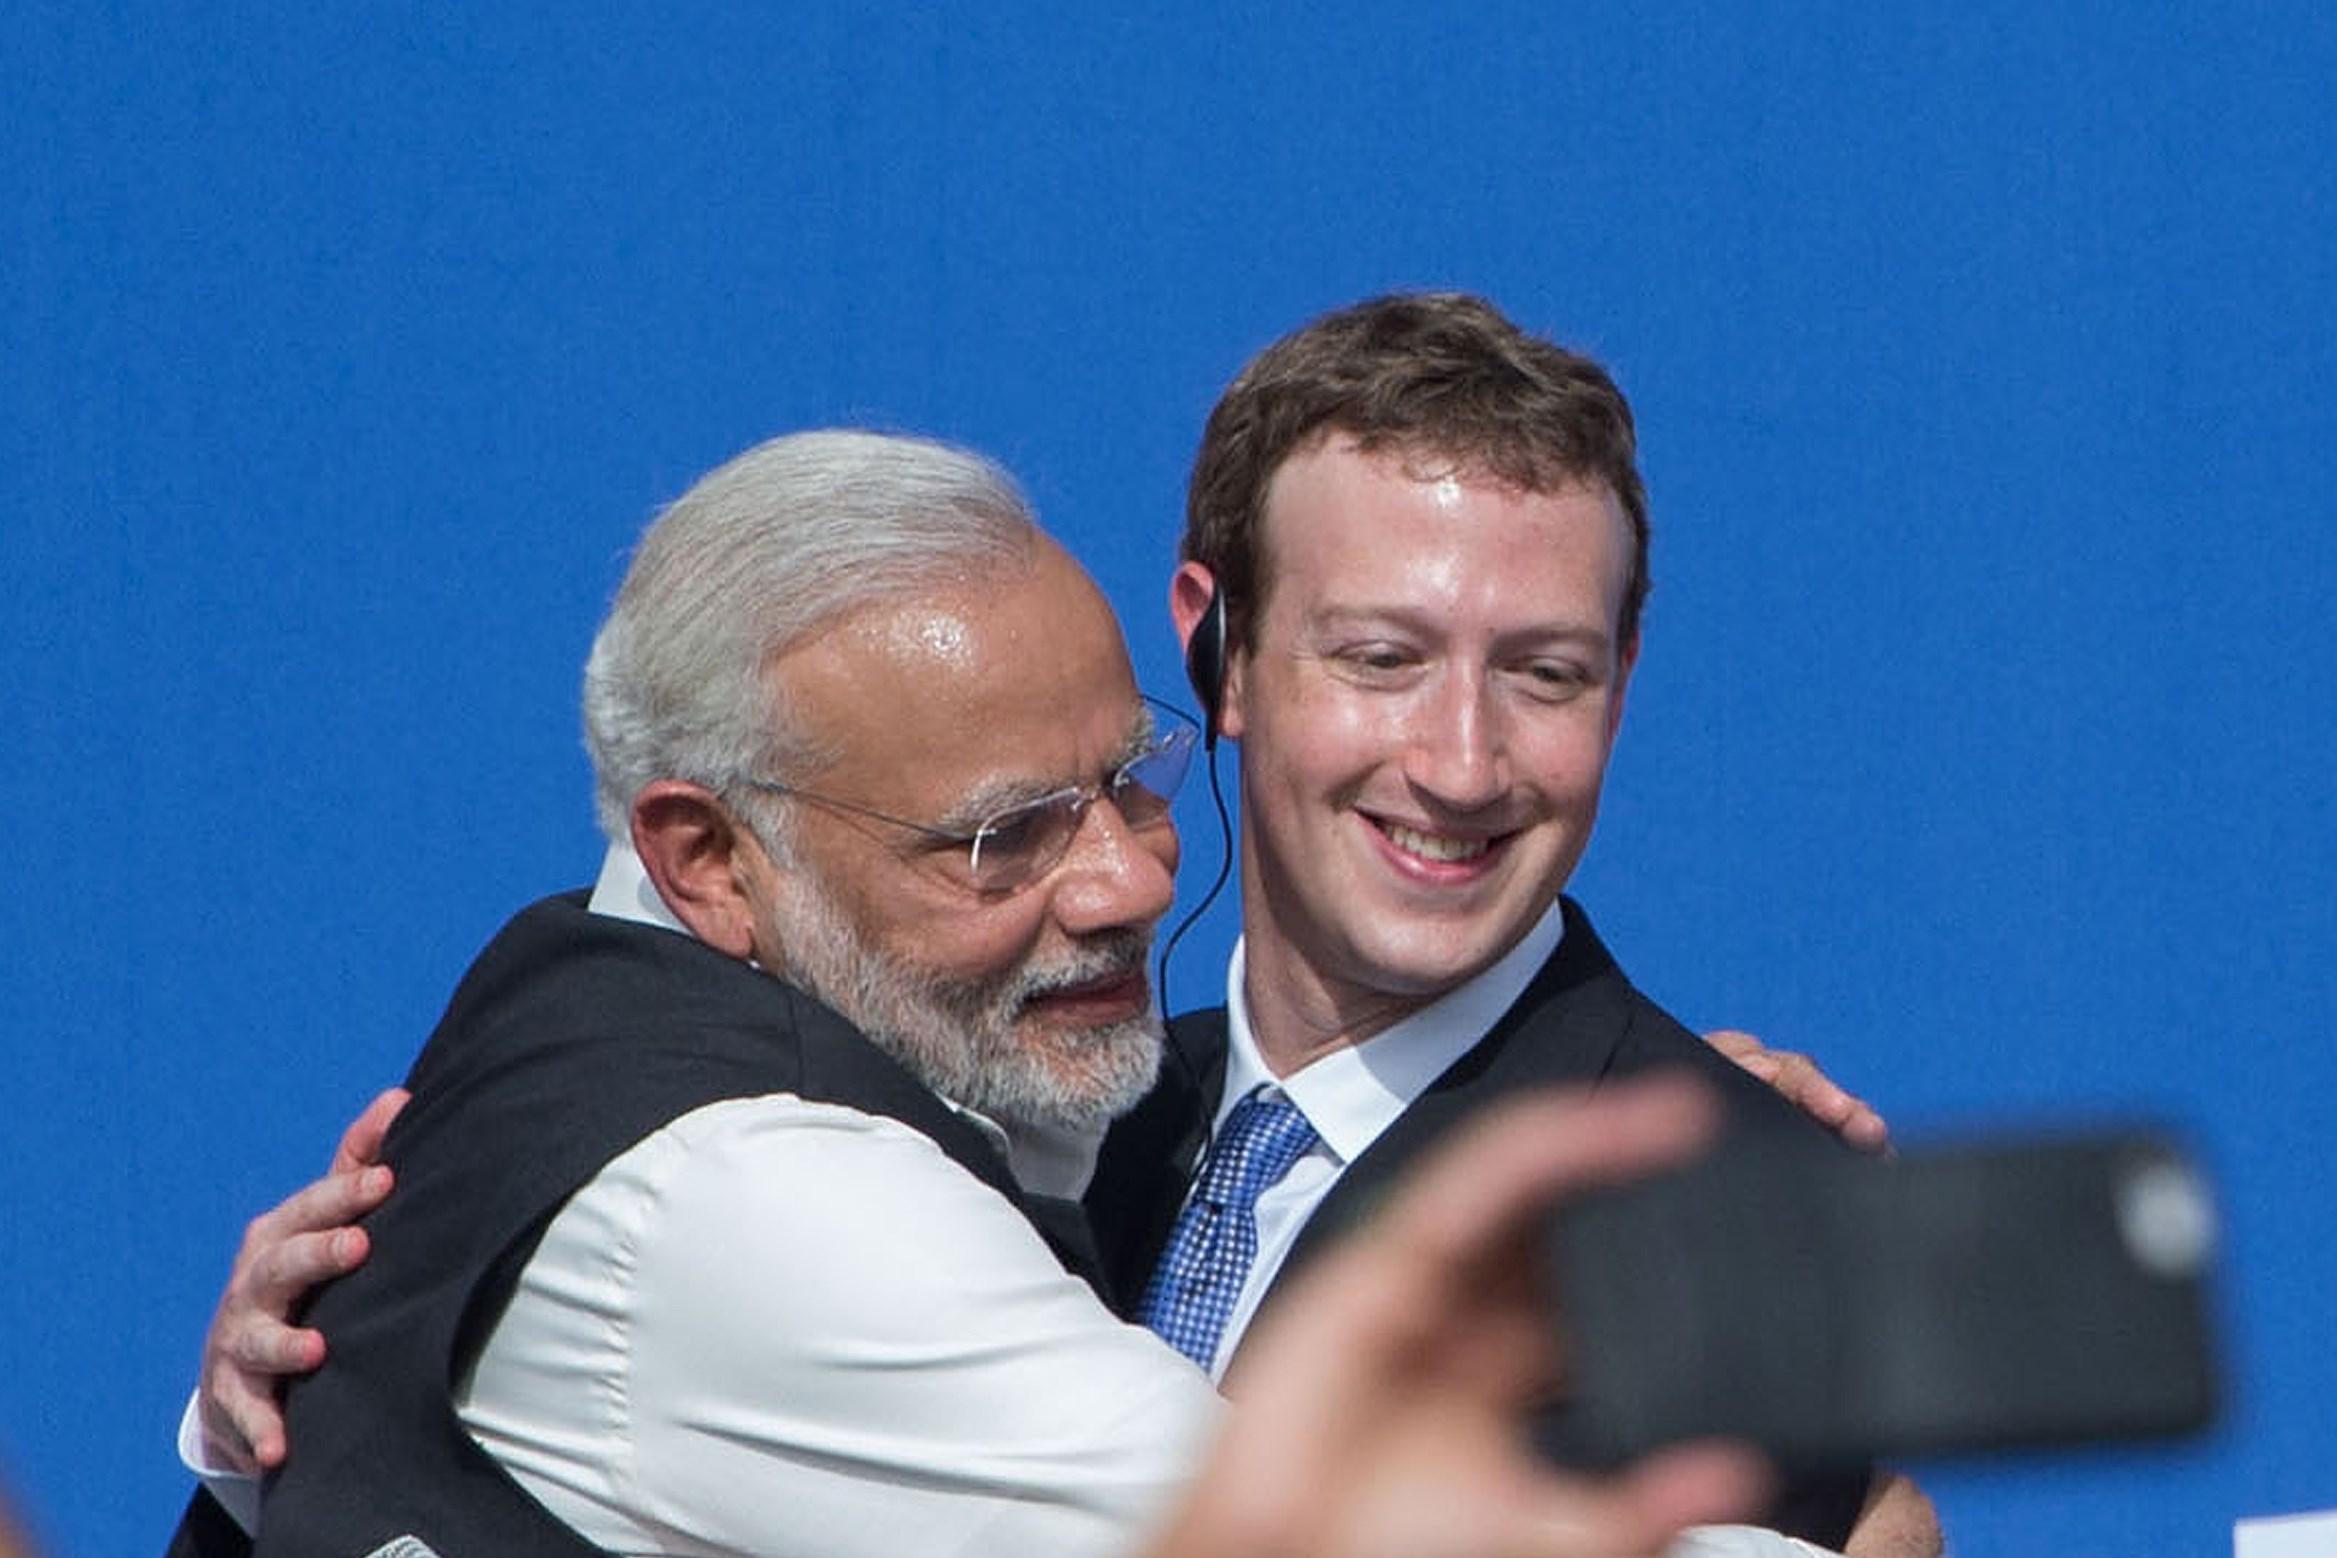 A hand holding a smartphone appears to take a photo of Modi and Zuckerberg embracing.
